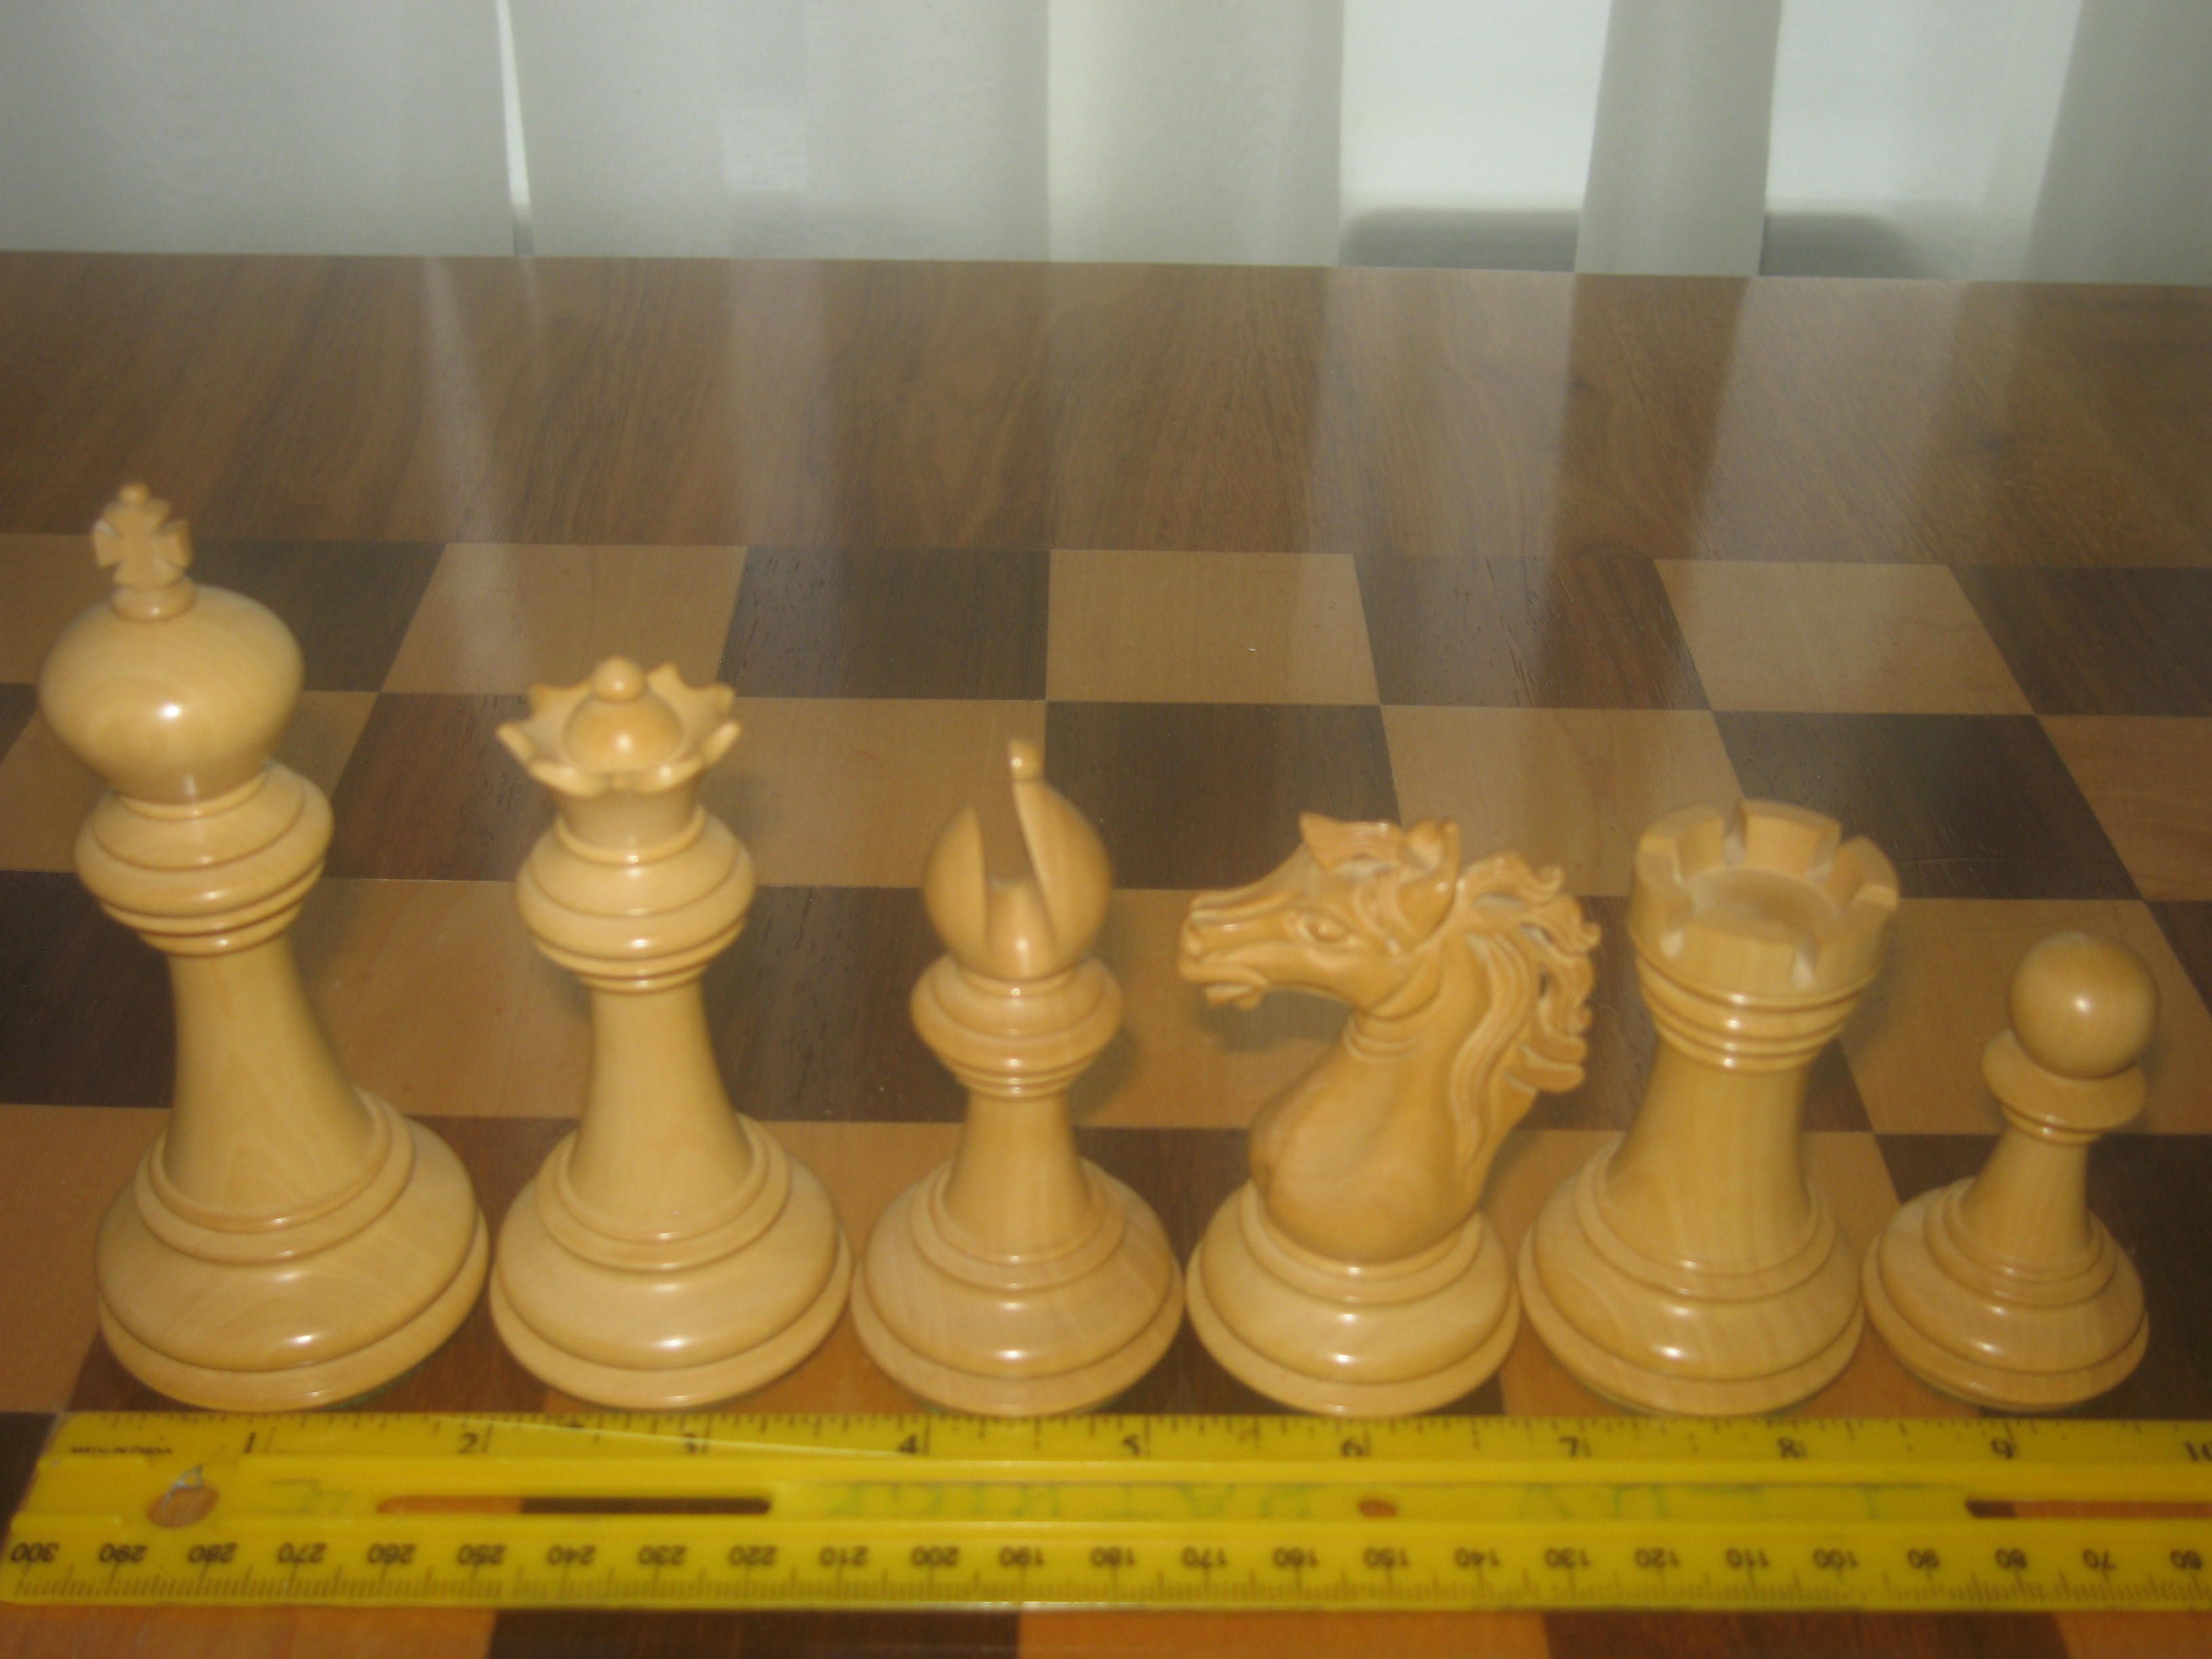 Find Your Perfect Chess Set at the Official Staunton Online Shop